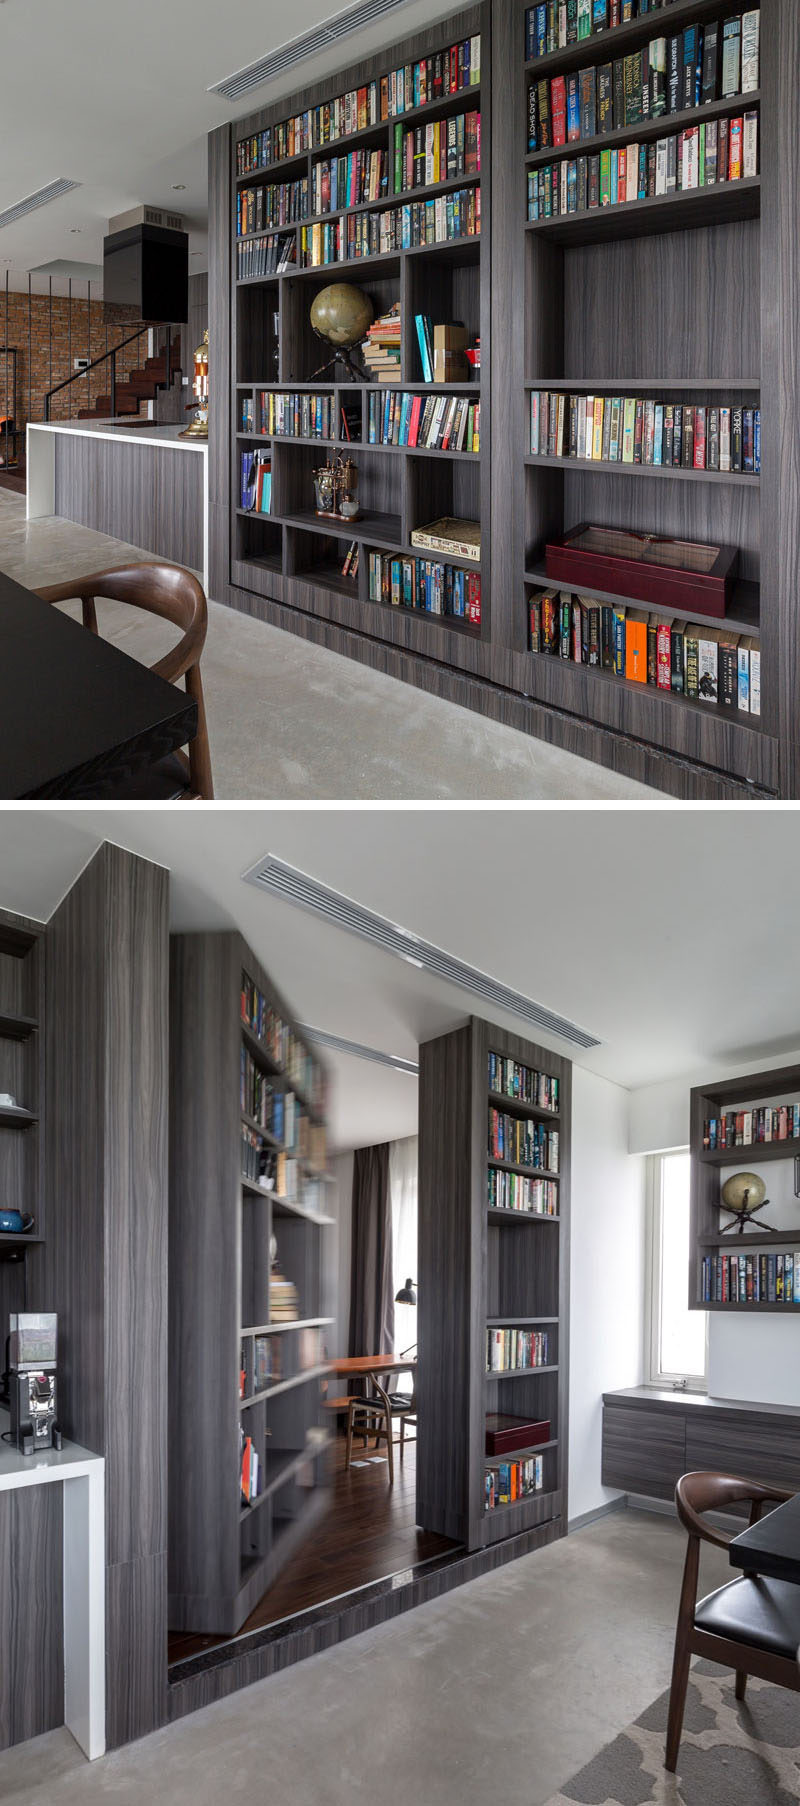 This large dark wood built-in bookshelf near the kitchen hides a secret door that provides access to a home office and guest room. 